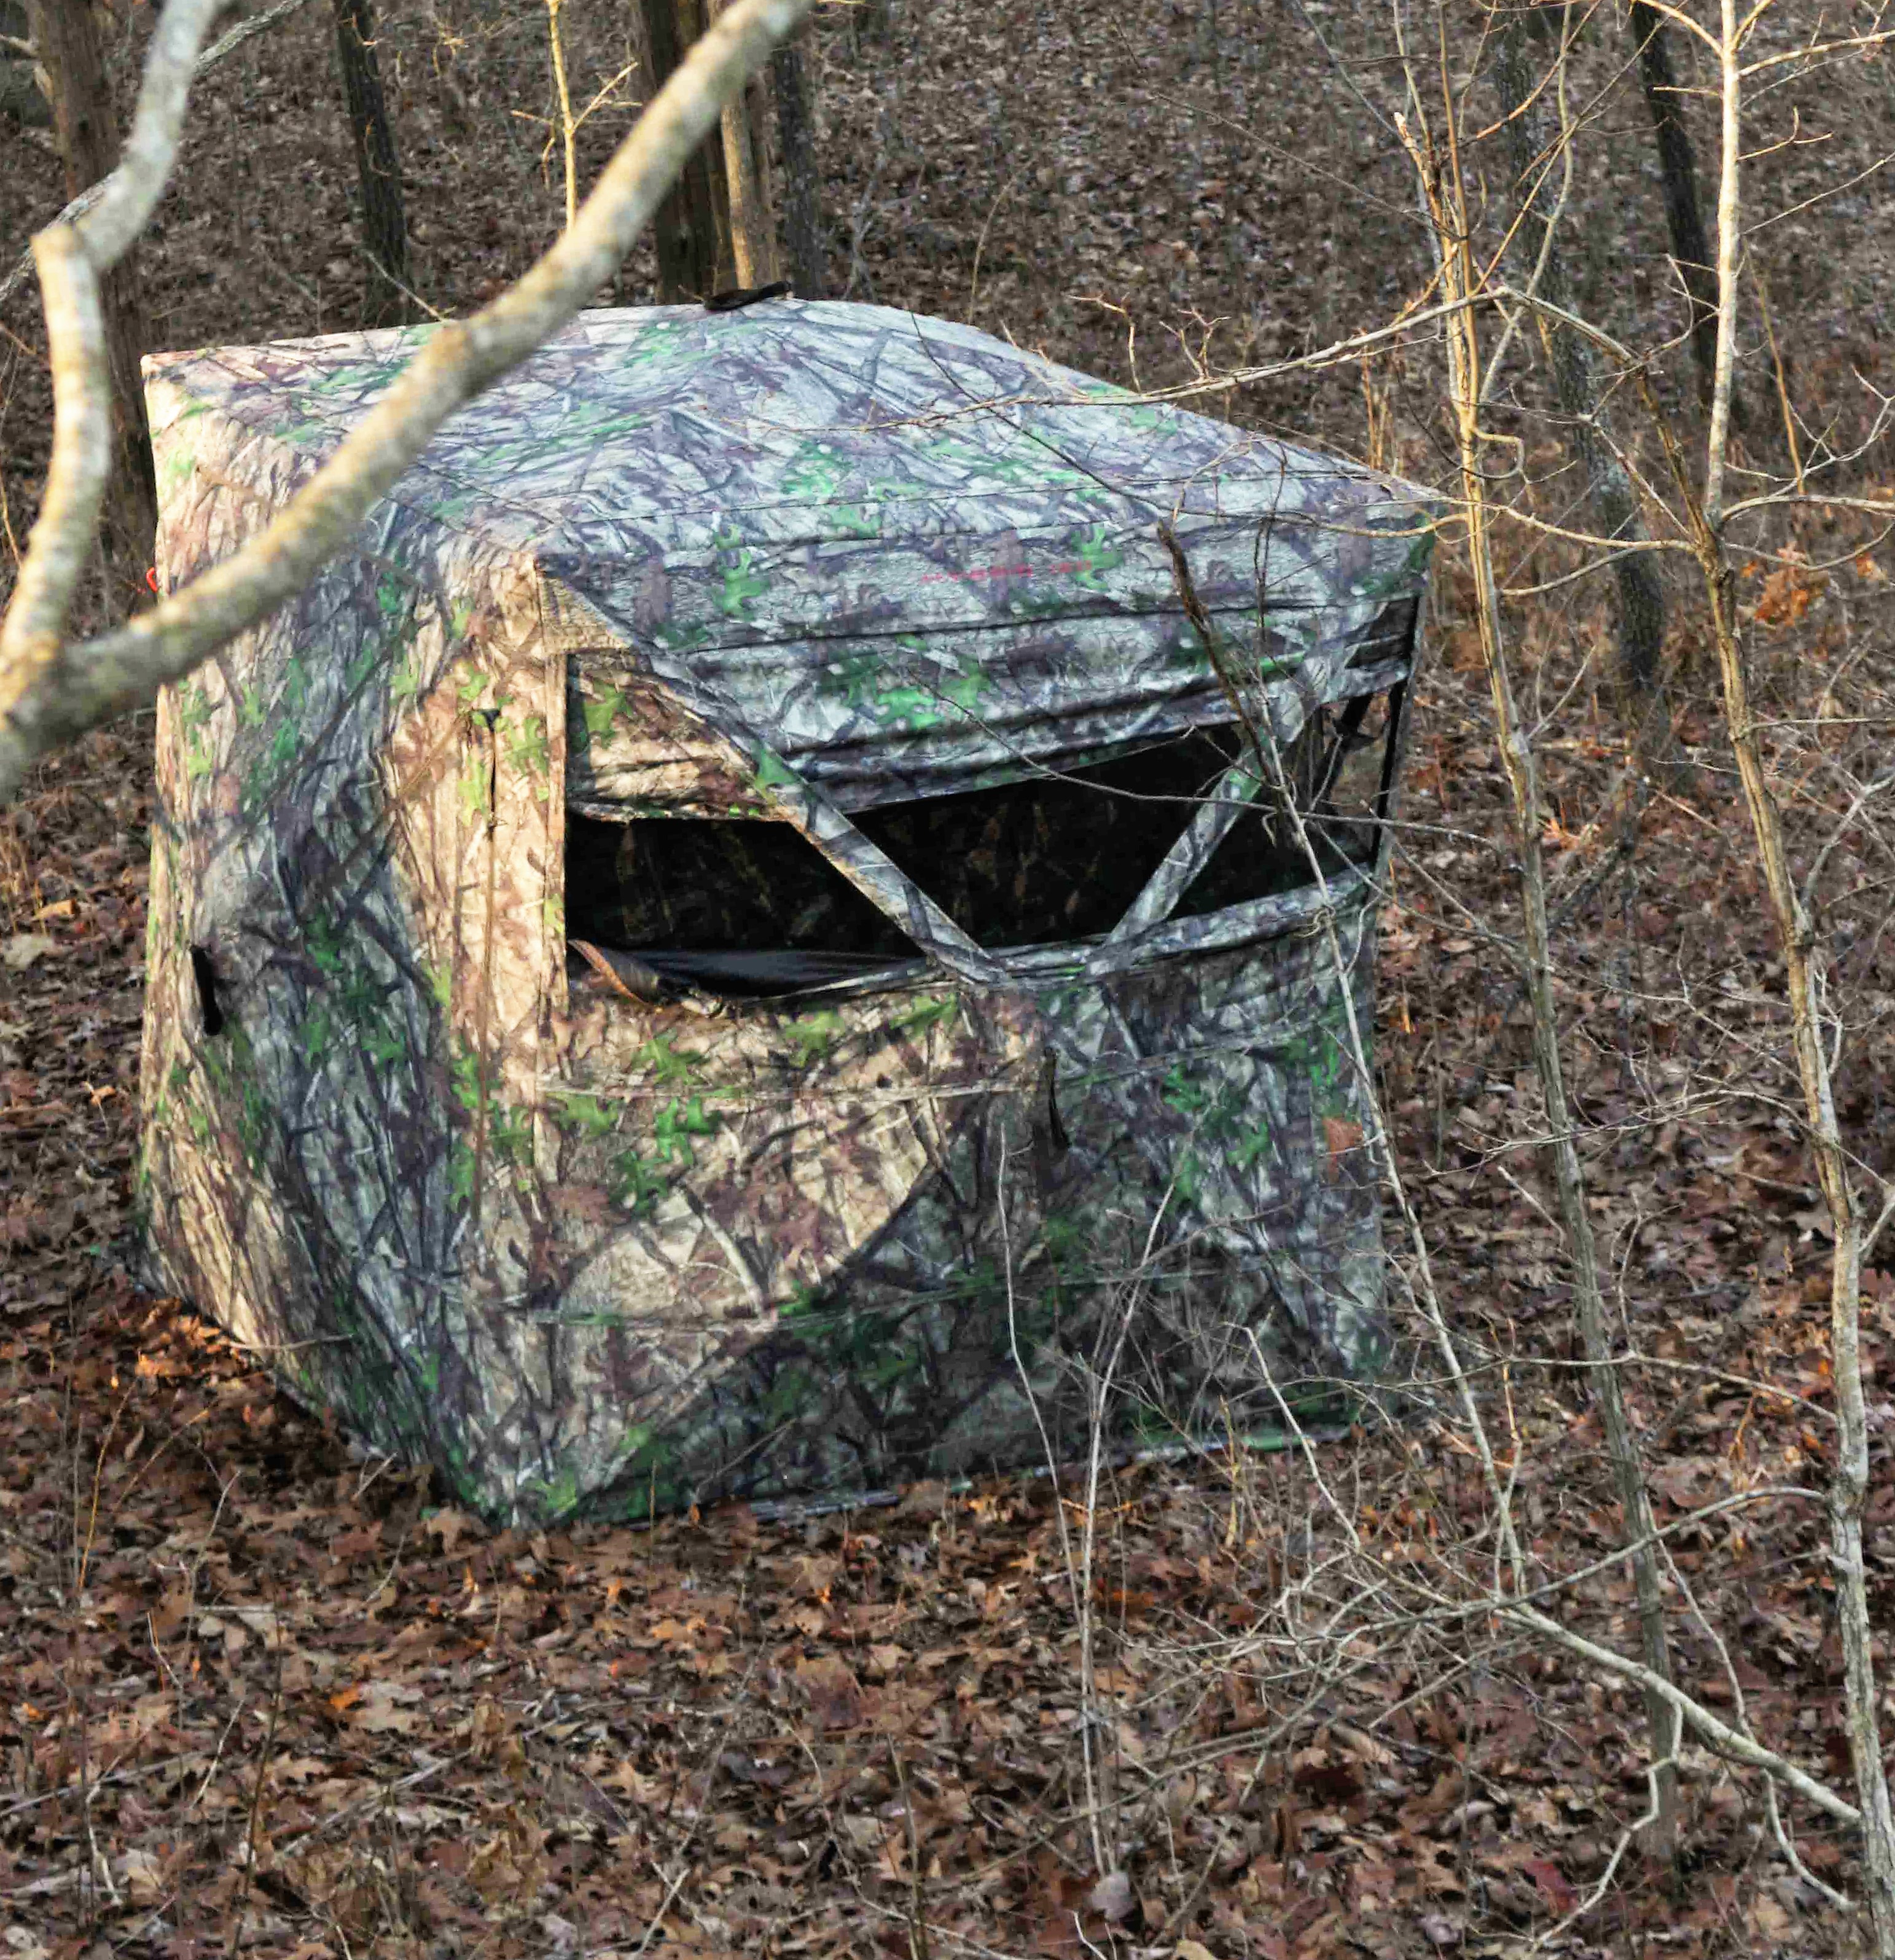 Ground blinds offer advantages of comfort and safety compared to tree stands, especially for aging hunters. 